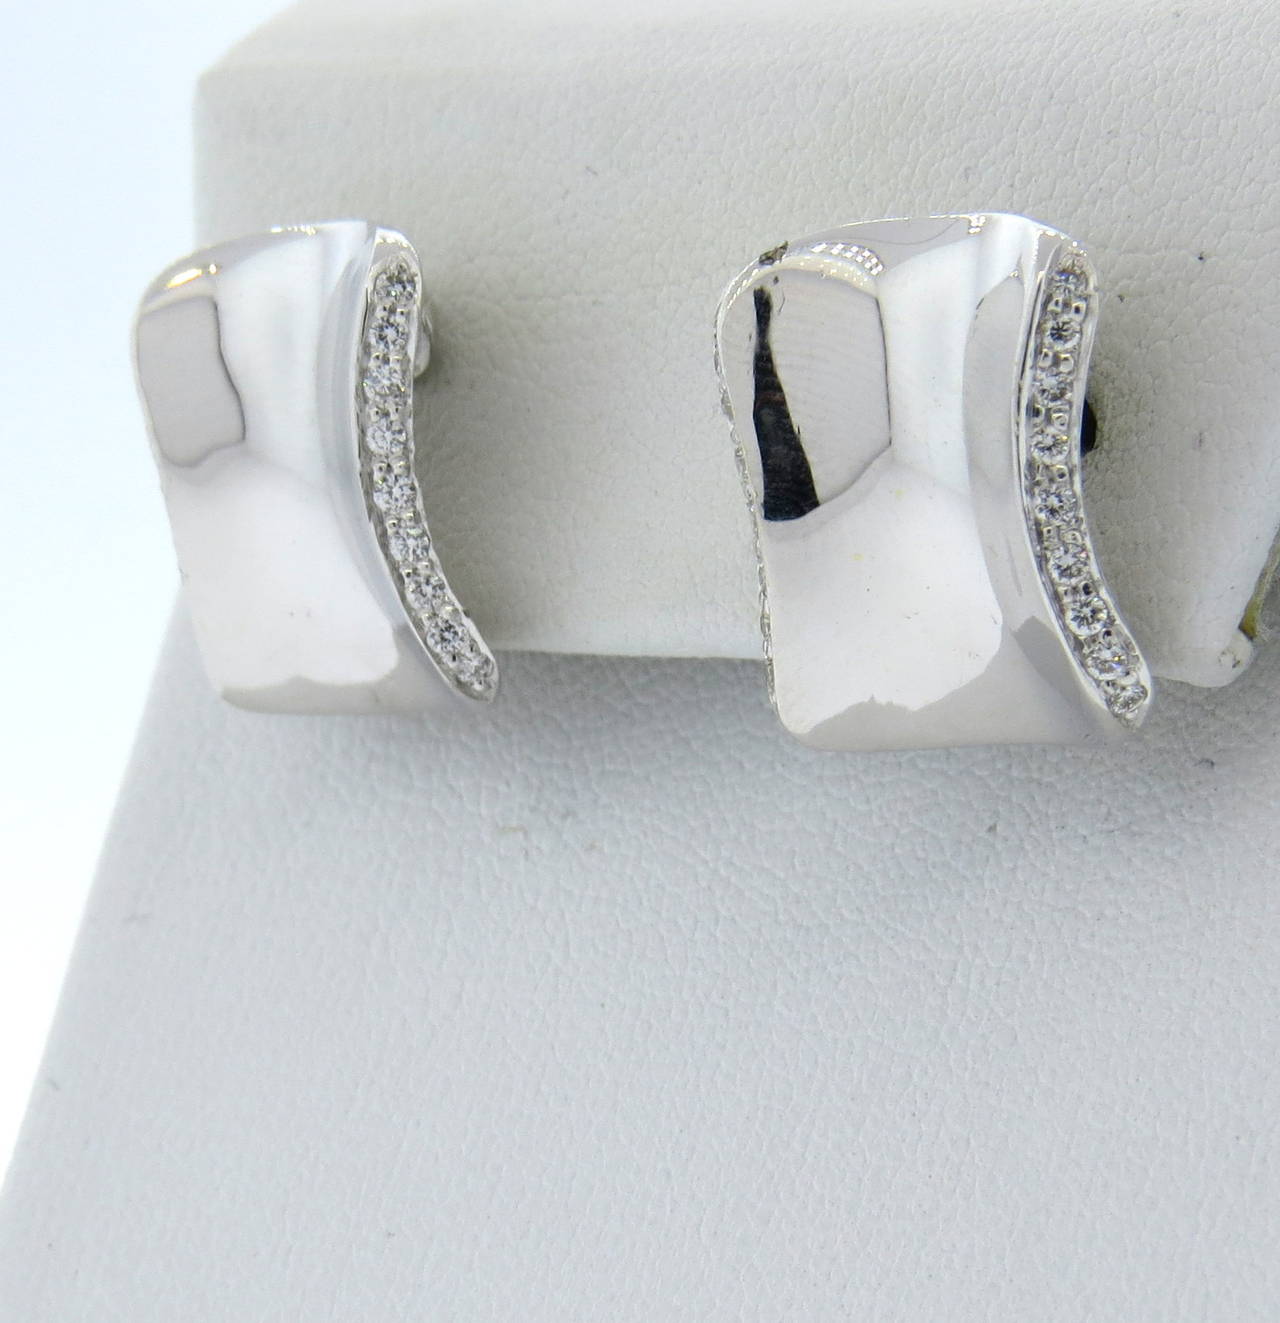 A pair of 18k white gold earrings, set with approximately 0.32ctw in G/VS diamonds.  Crafted by Robert Lee Morris, the earrings measure 17mm x 15mm and weigh 9.6 grams.  Marked: Robert Lee Morris, 18k